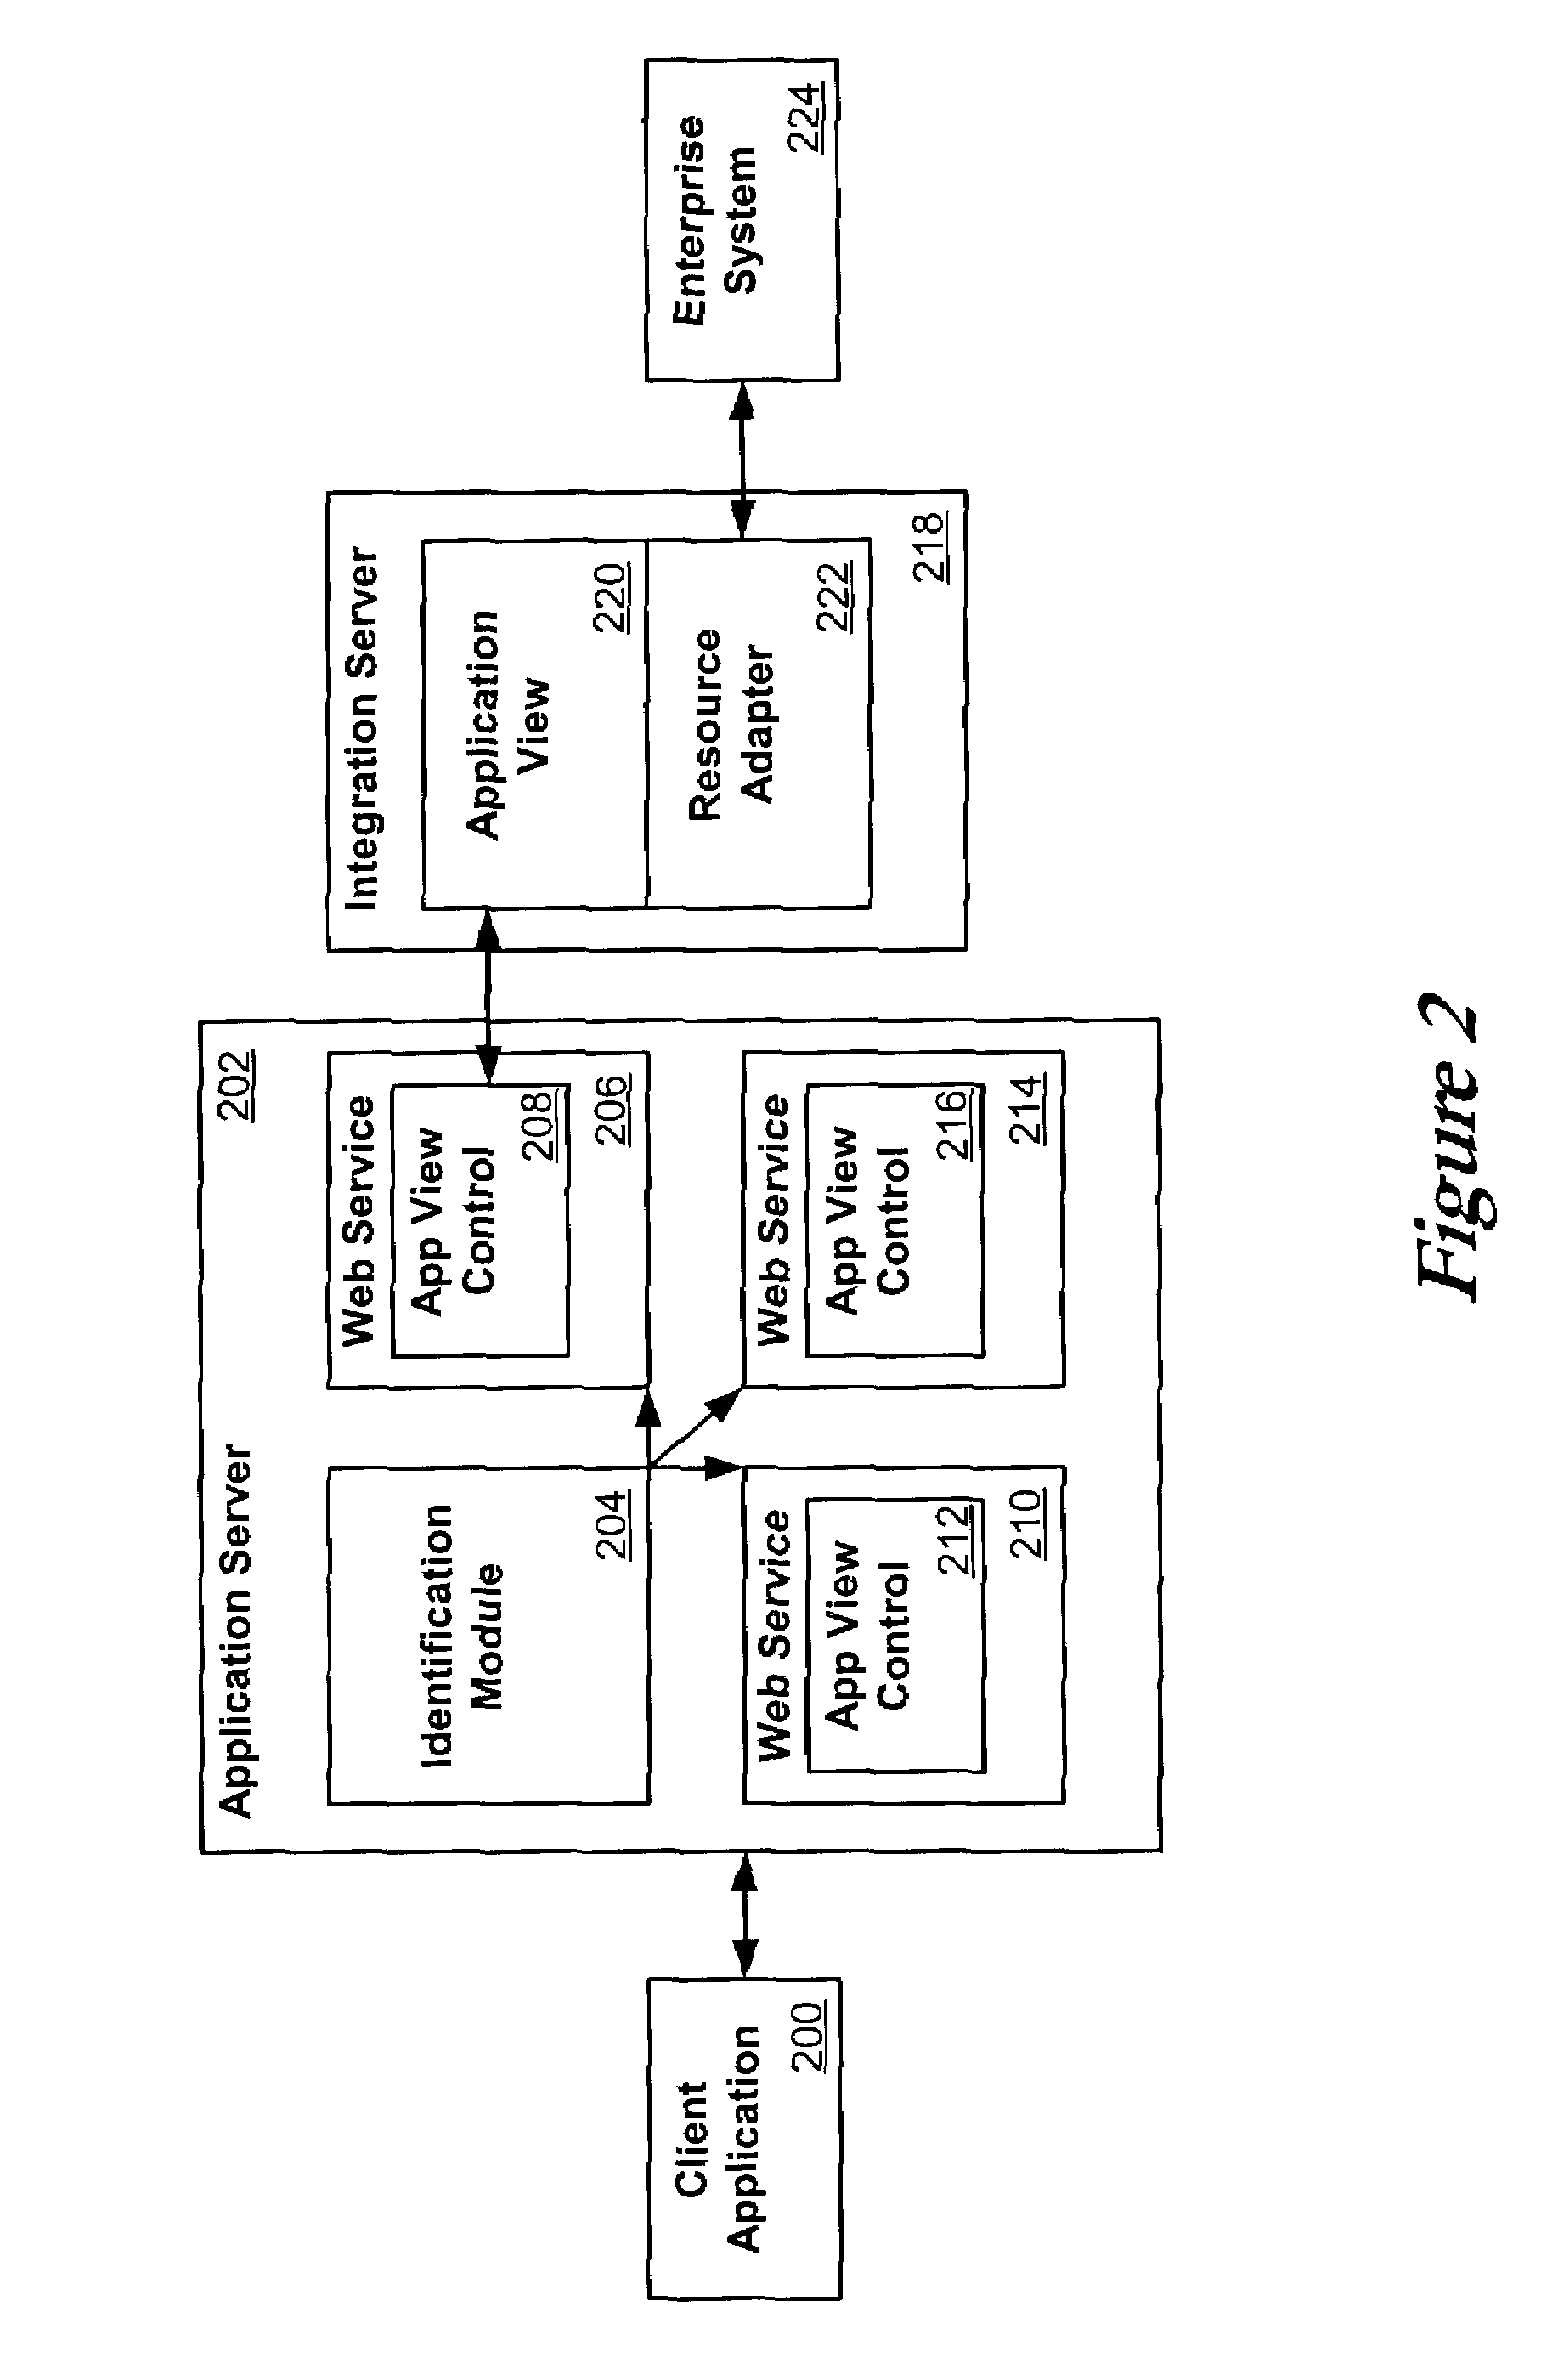 System and method for using web services with an enterprise system